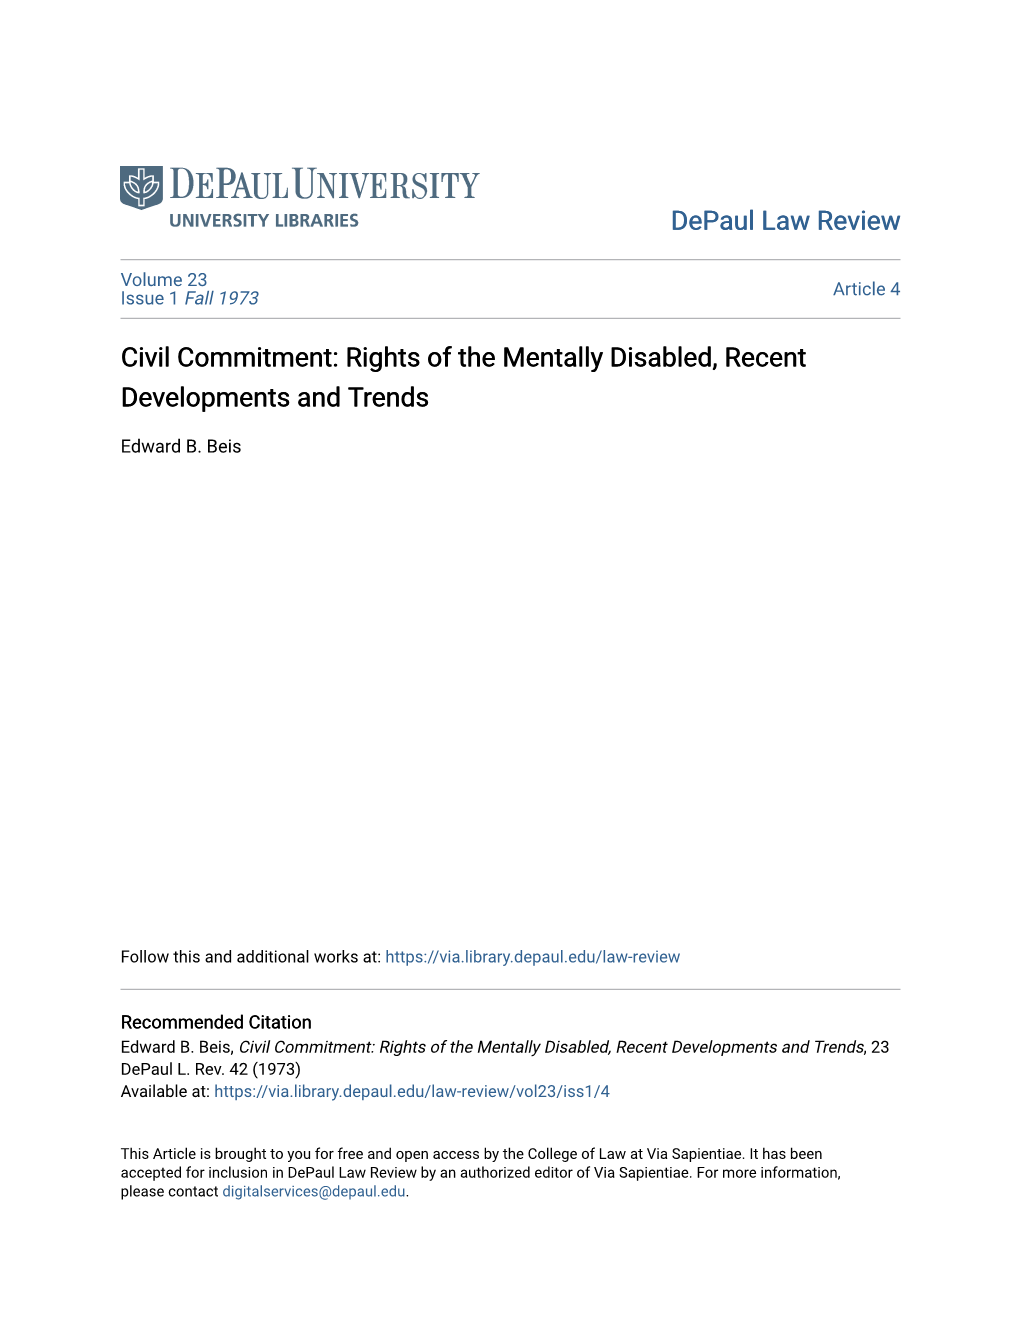 Civil Commitment: Rights of the Mentally Disabled, Recent Developments and Trends